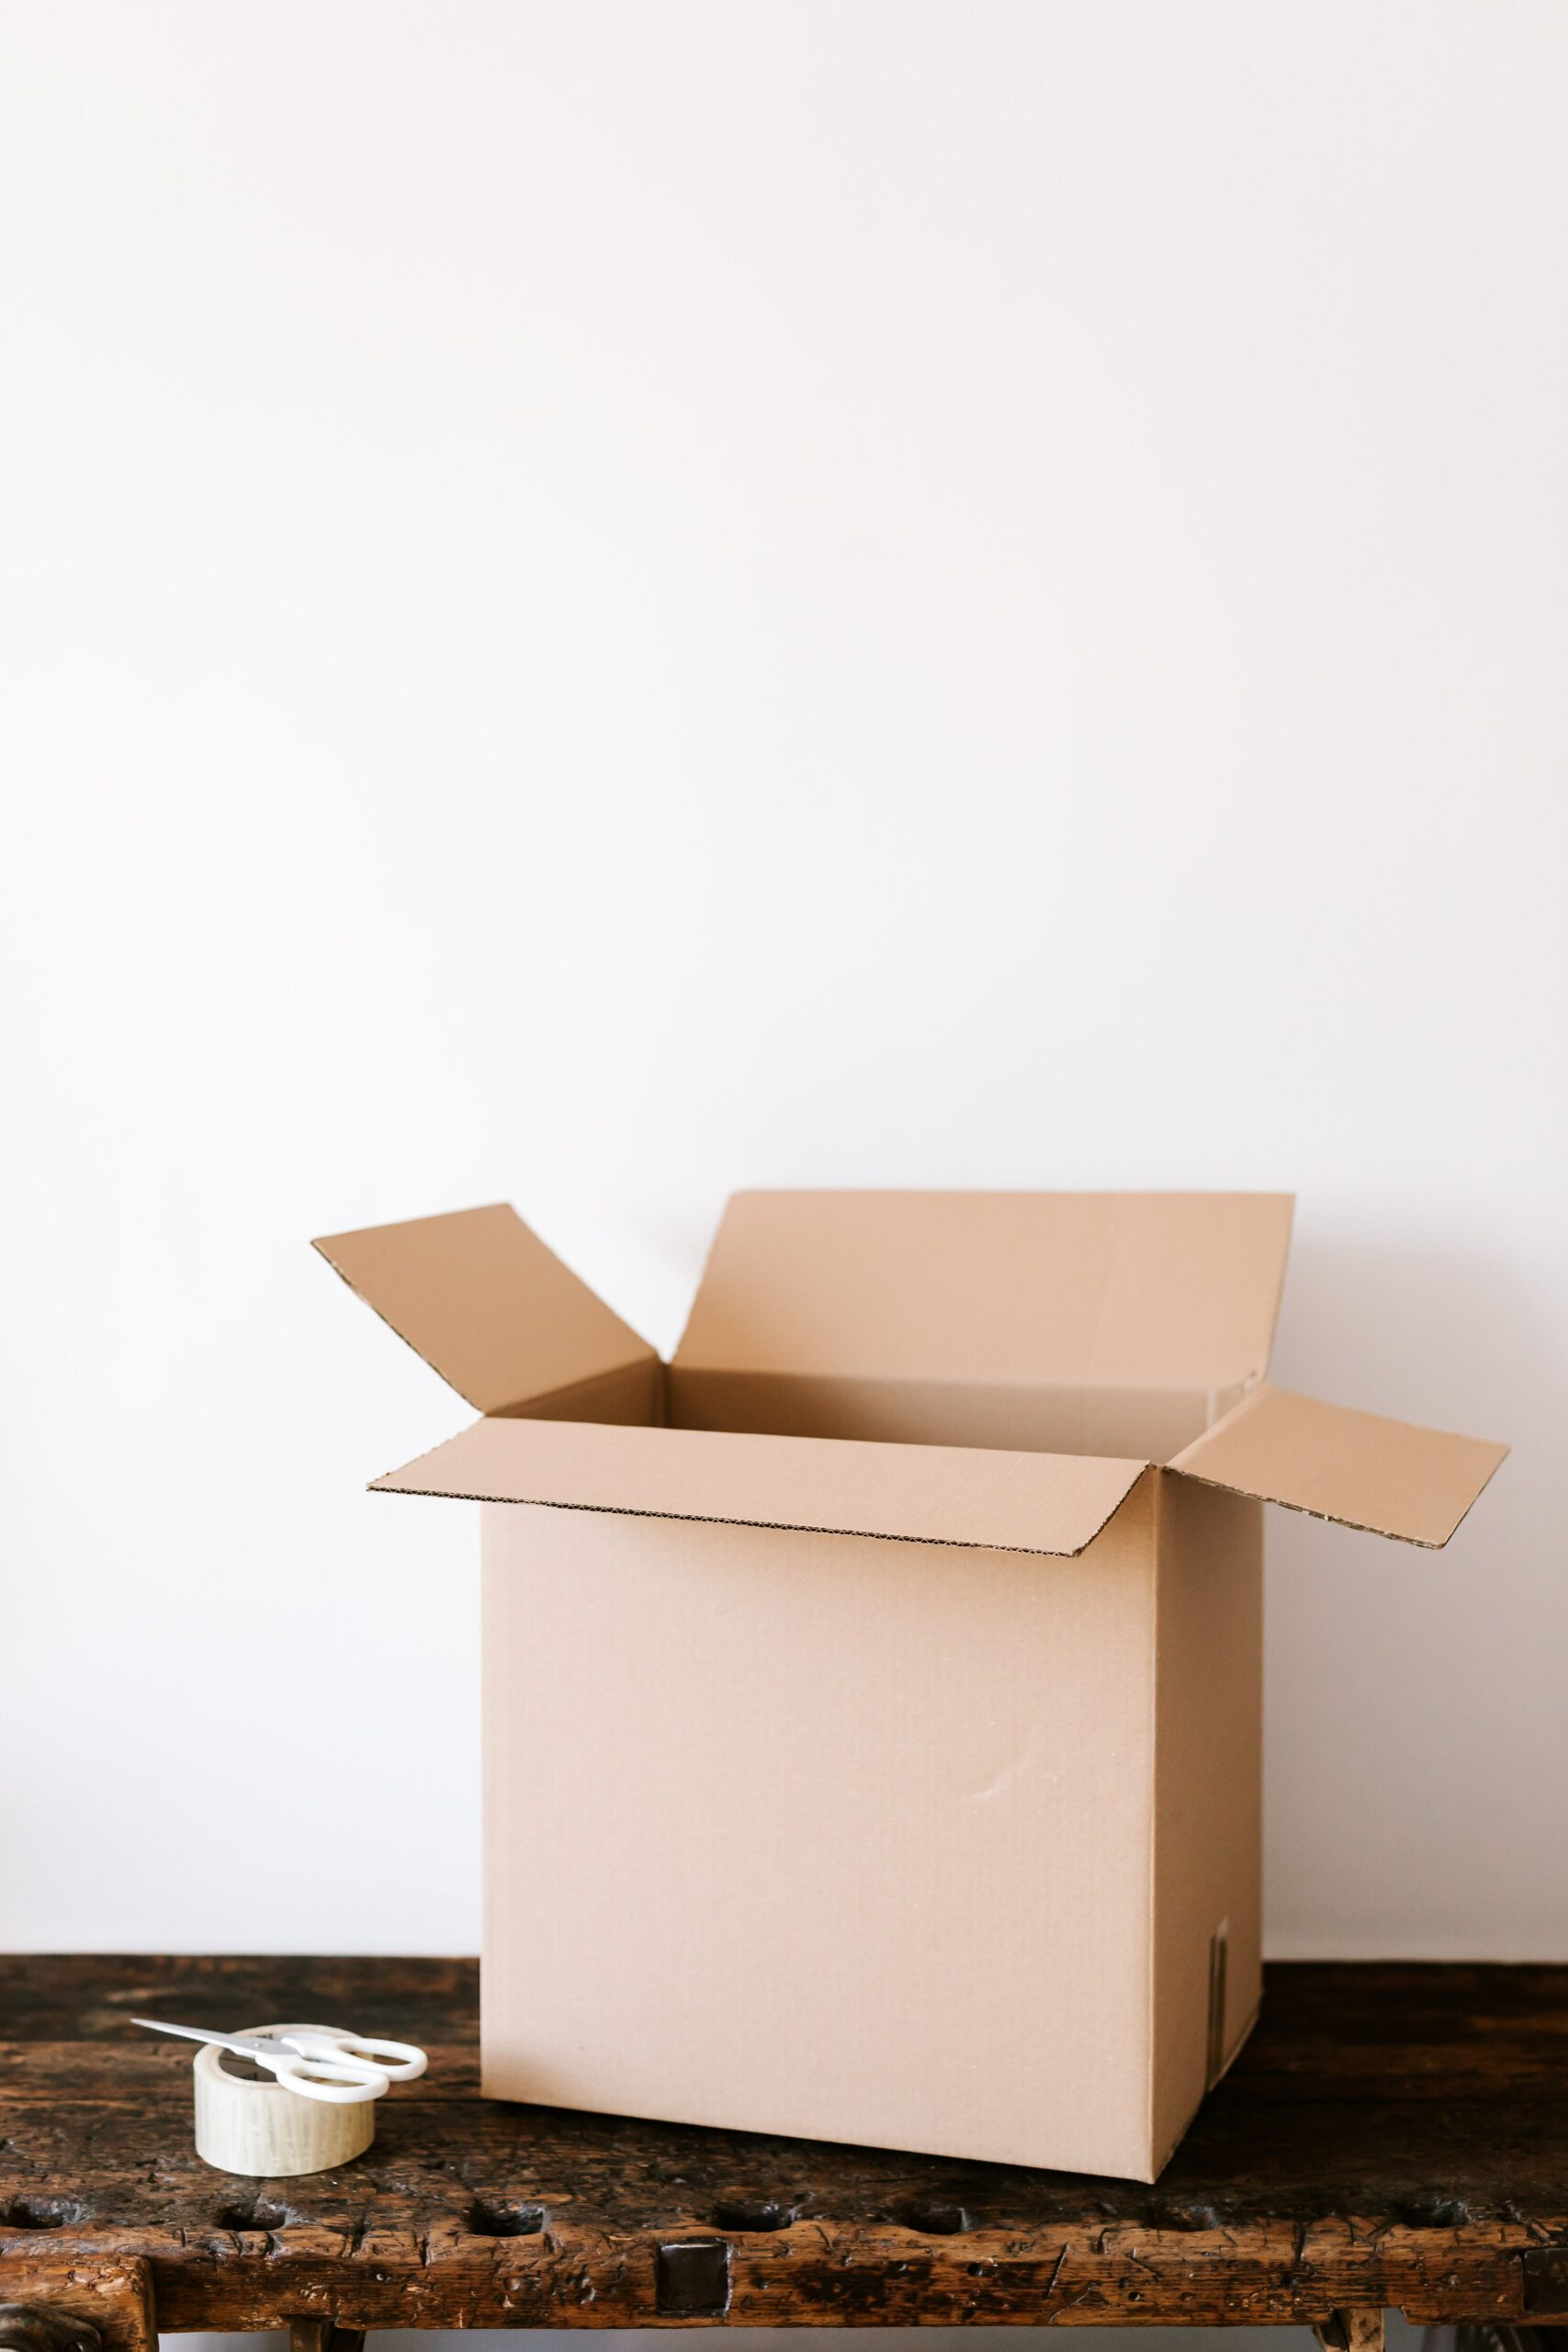 Moving & Storage Ideas for a Stress-Free Transition